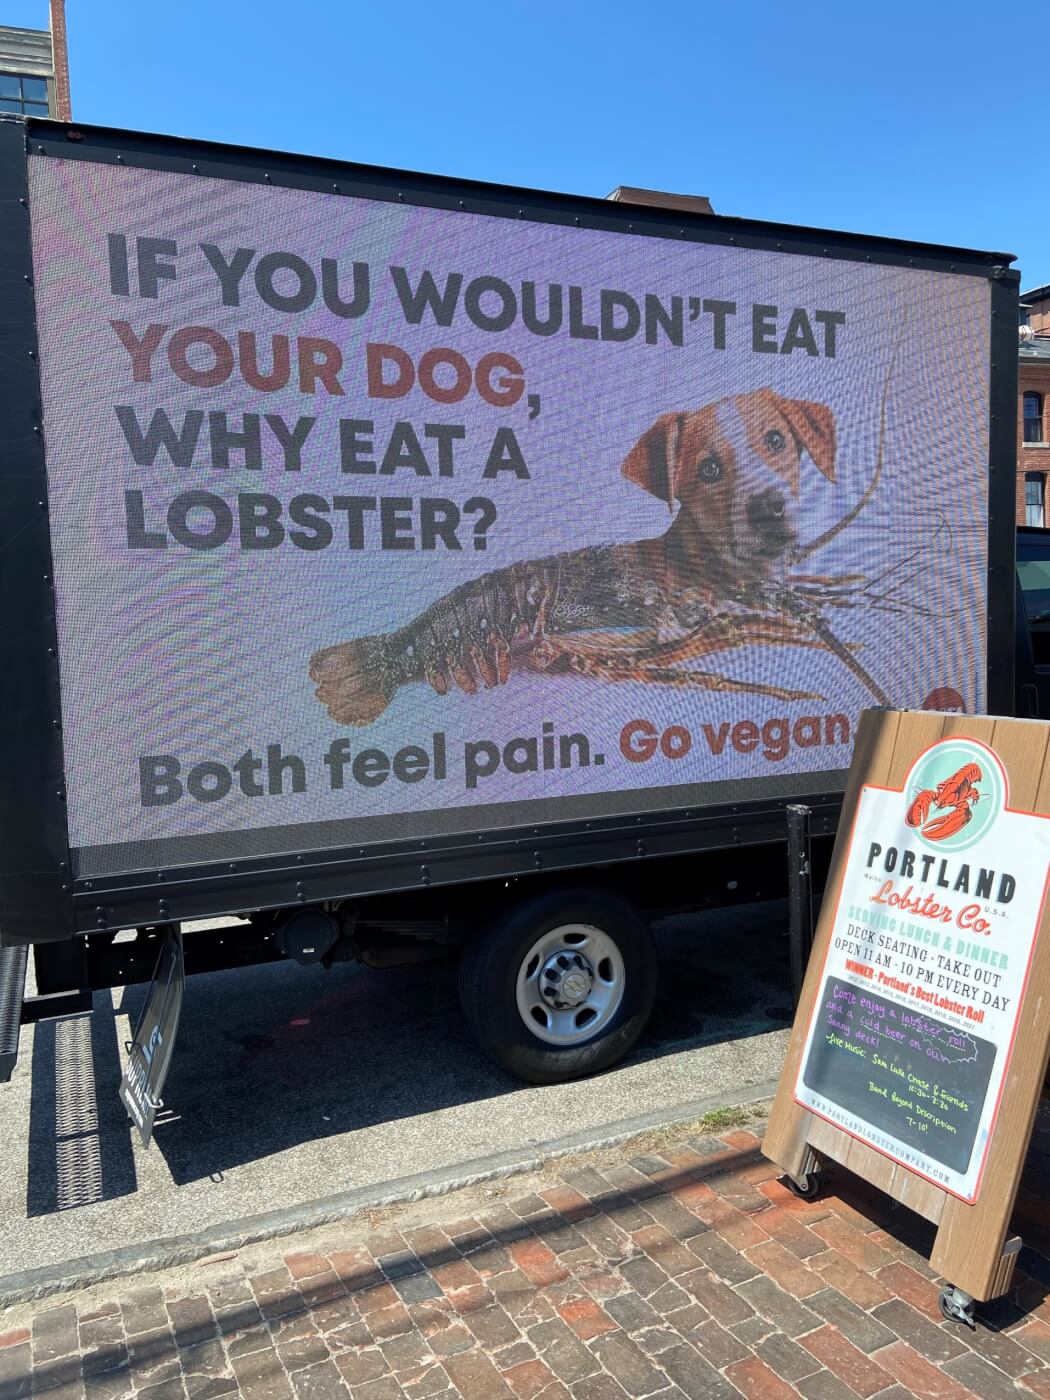 A mobile billboard in Portland, ME reads "If you wouldn't eat your dog, why eat a lobster? Both feel pain. Go vegan." with an image of a lobster with a dog's head.